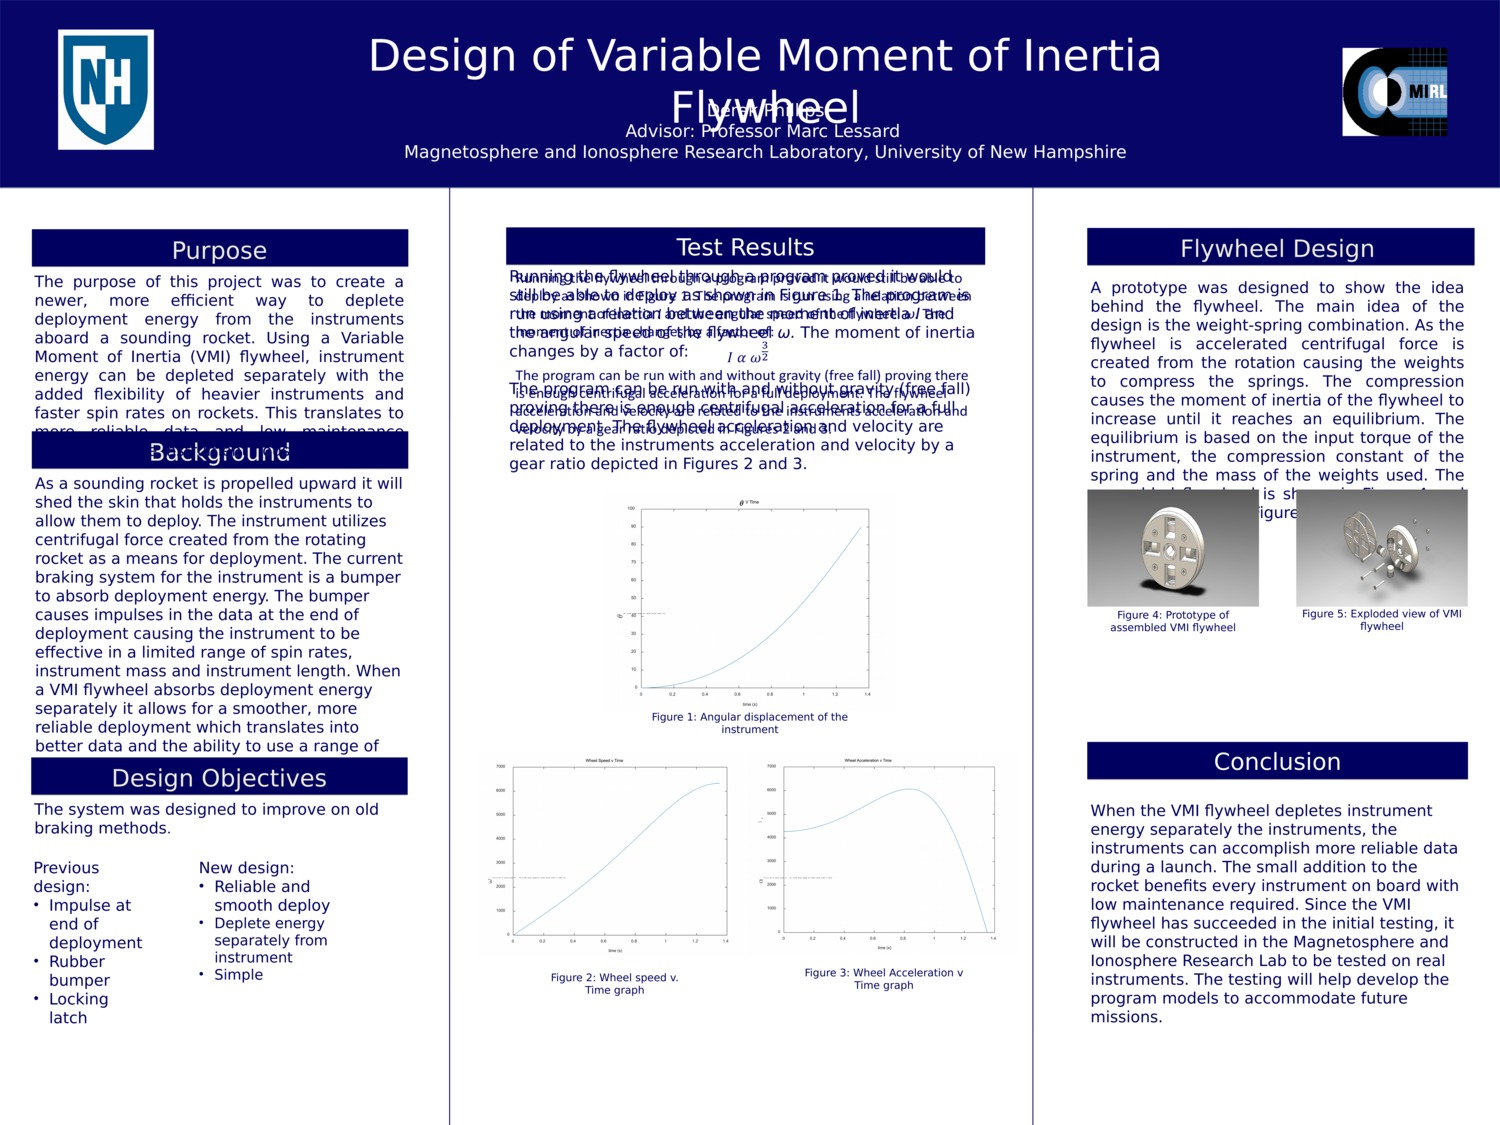 Design Of Variable Moment Of Inertia Flywheel by dppv1